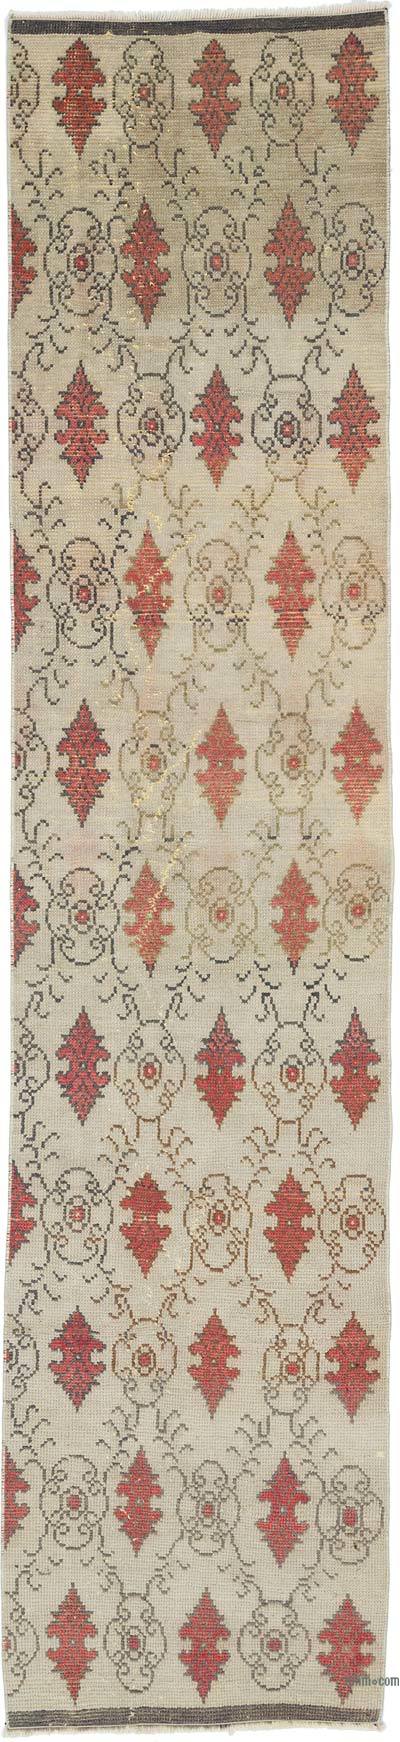 Vintage Turkish Hand-Knotted Runner - 2' 4" x 10' 4" (28 in. x 124 in.)